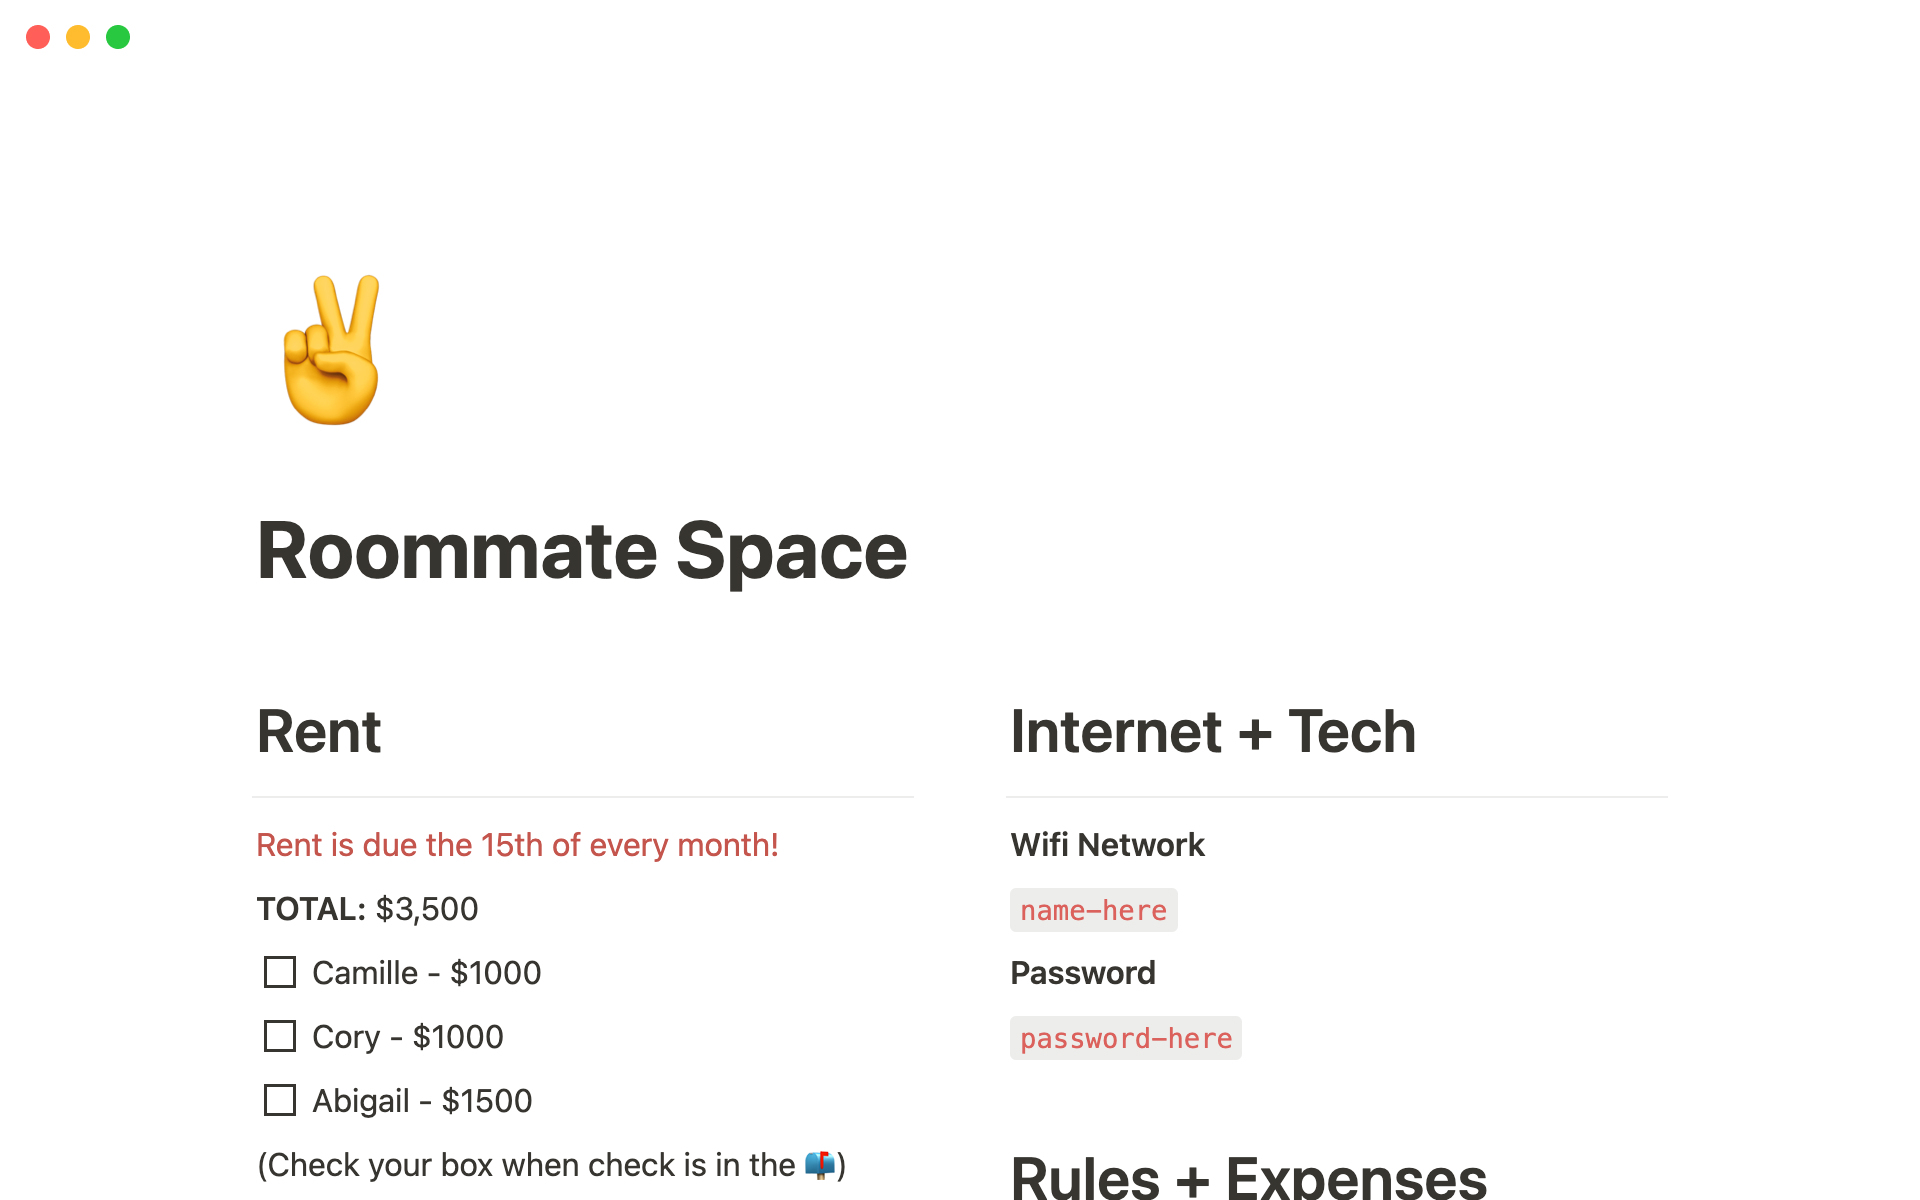 The desktop image for the Roommate space template